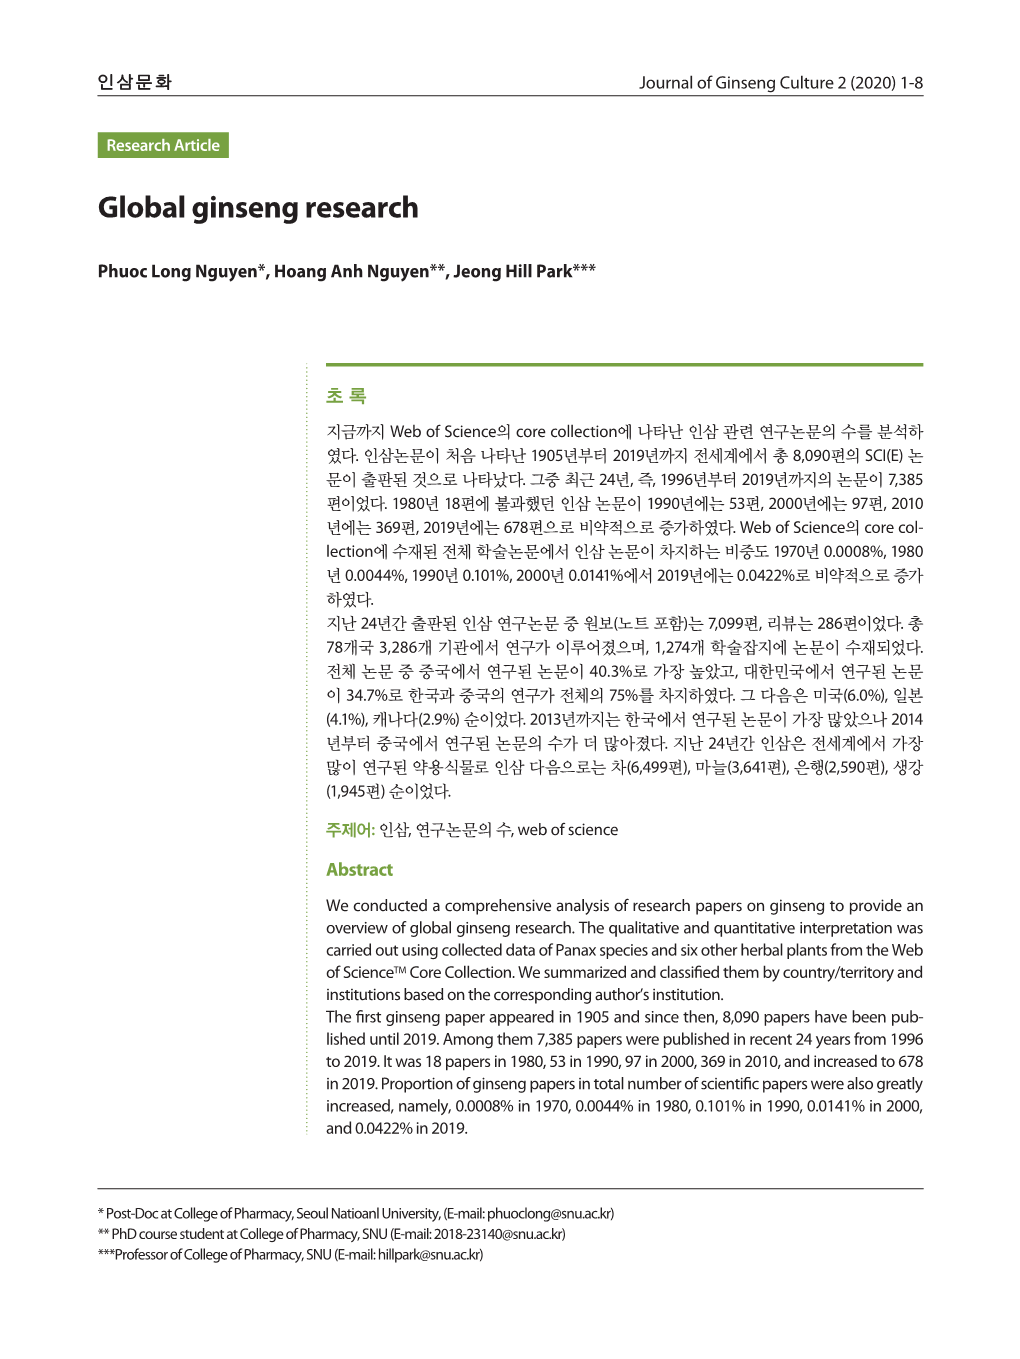 Global Ginseng Research